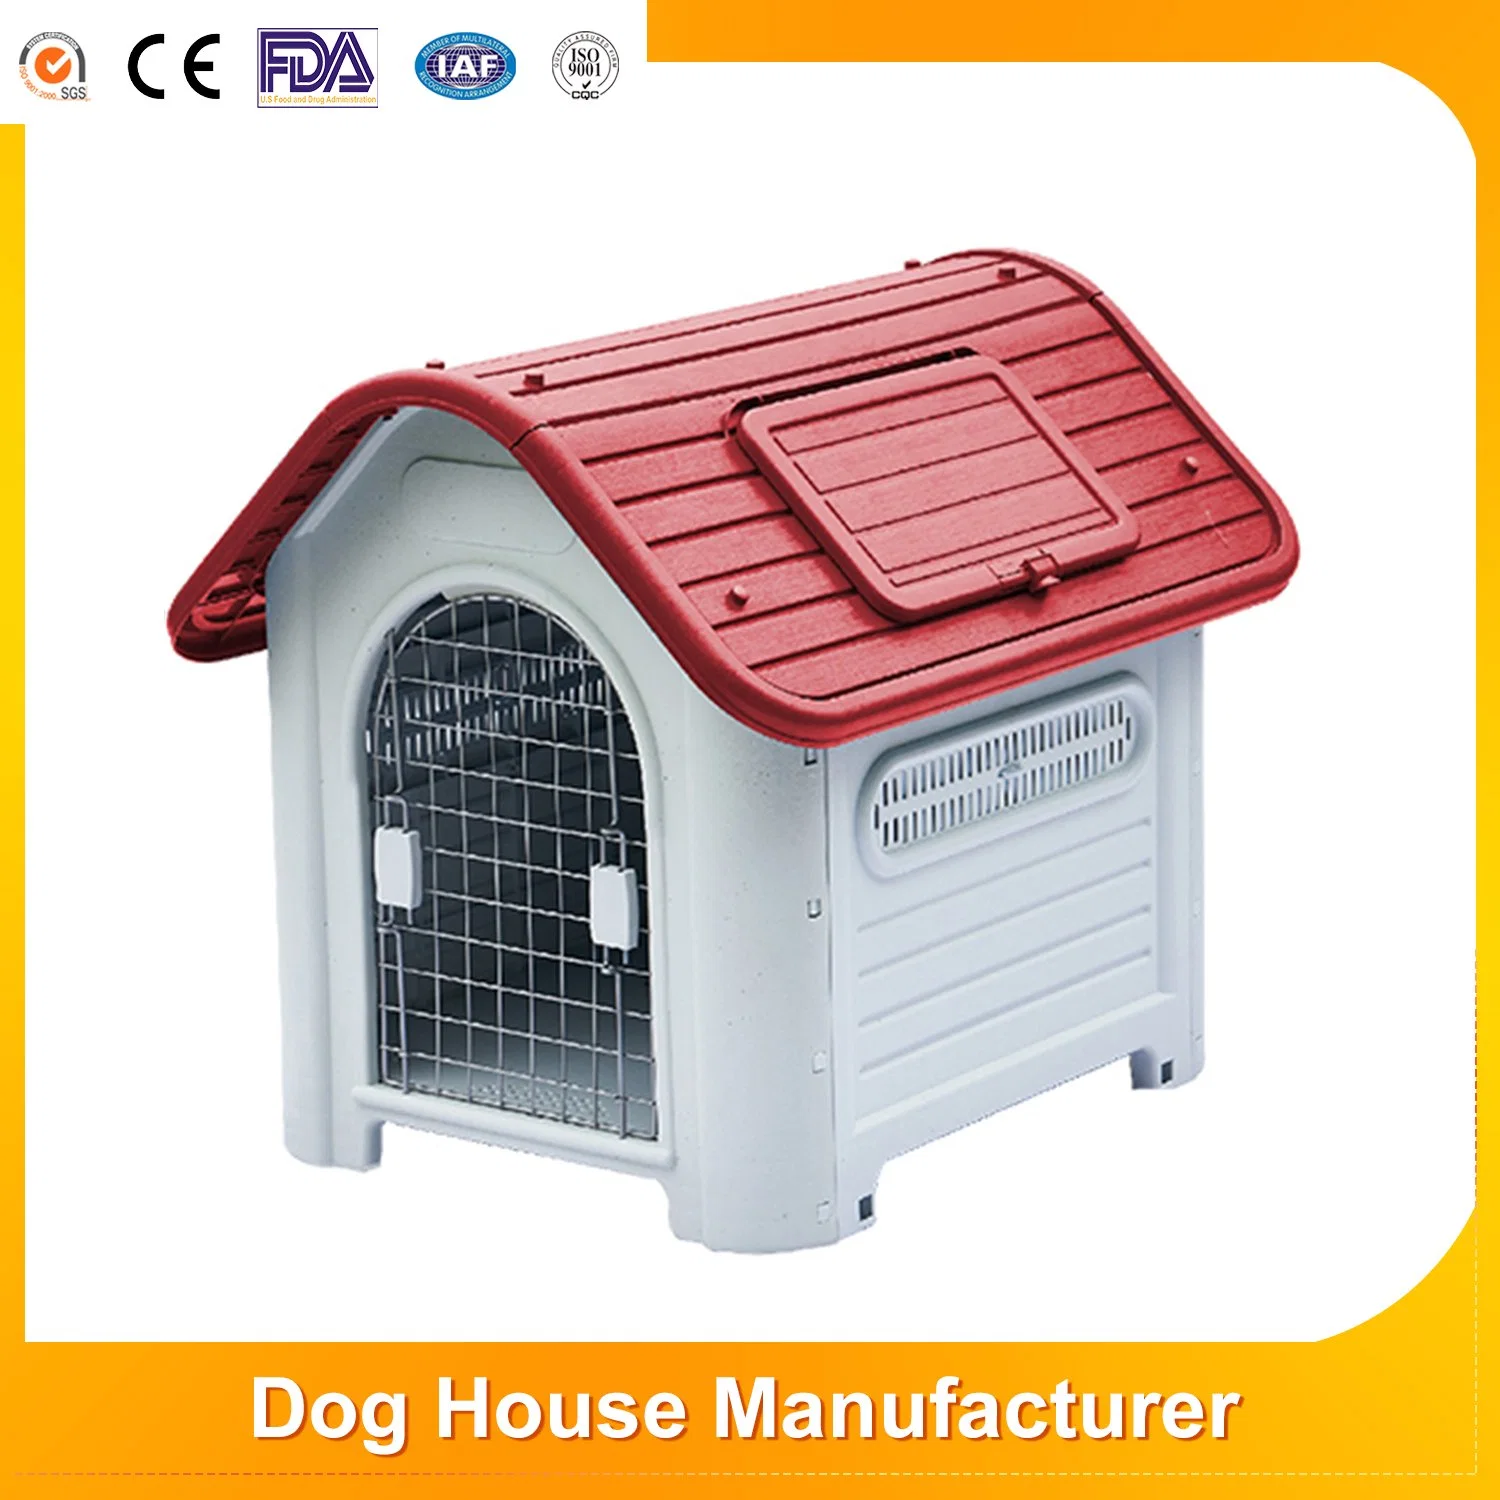 Hot Selling Waterproof Ventilate Large Plastic Dog Kennel Shelter Waterproof and Sunscreen Removable Pet House